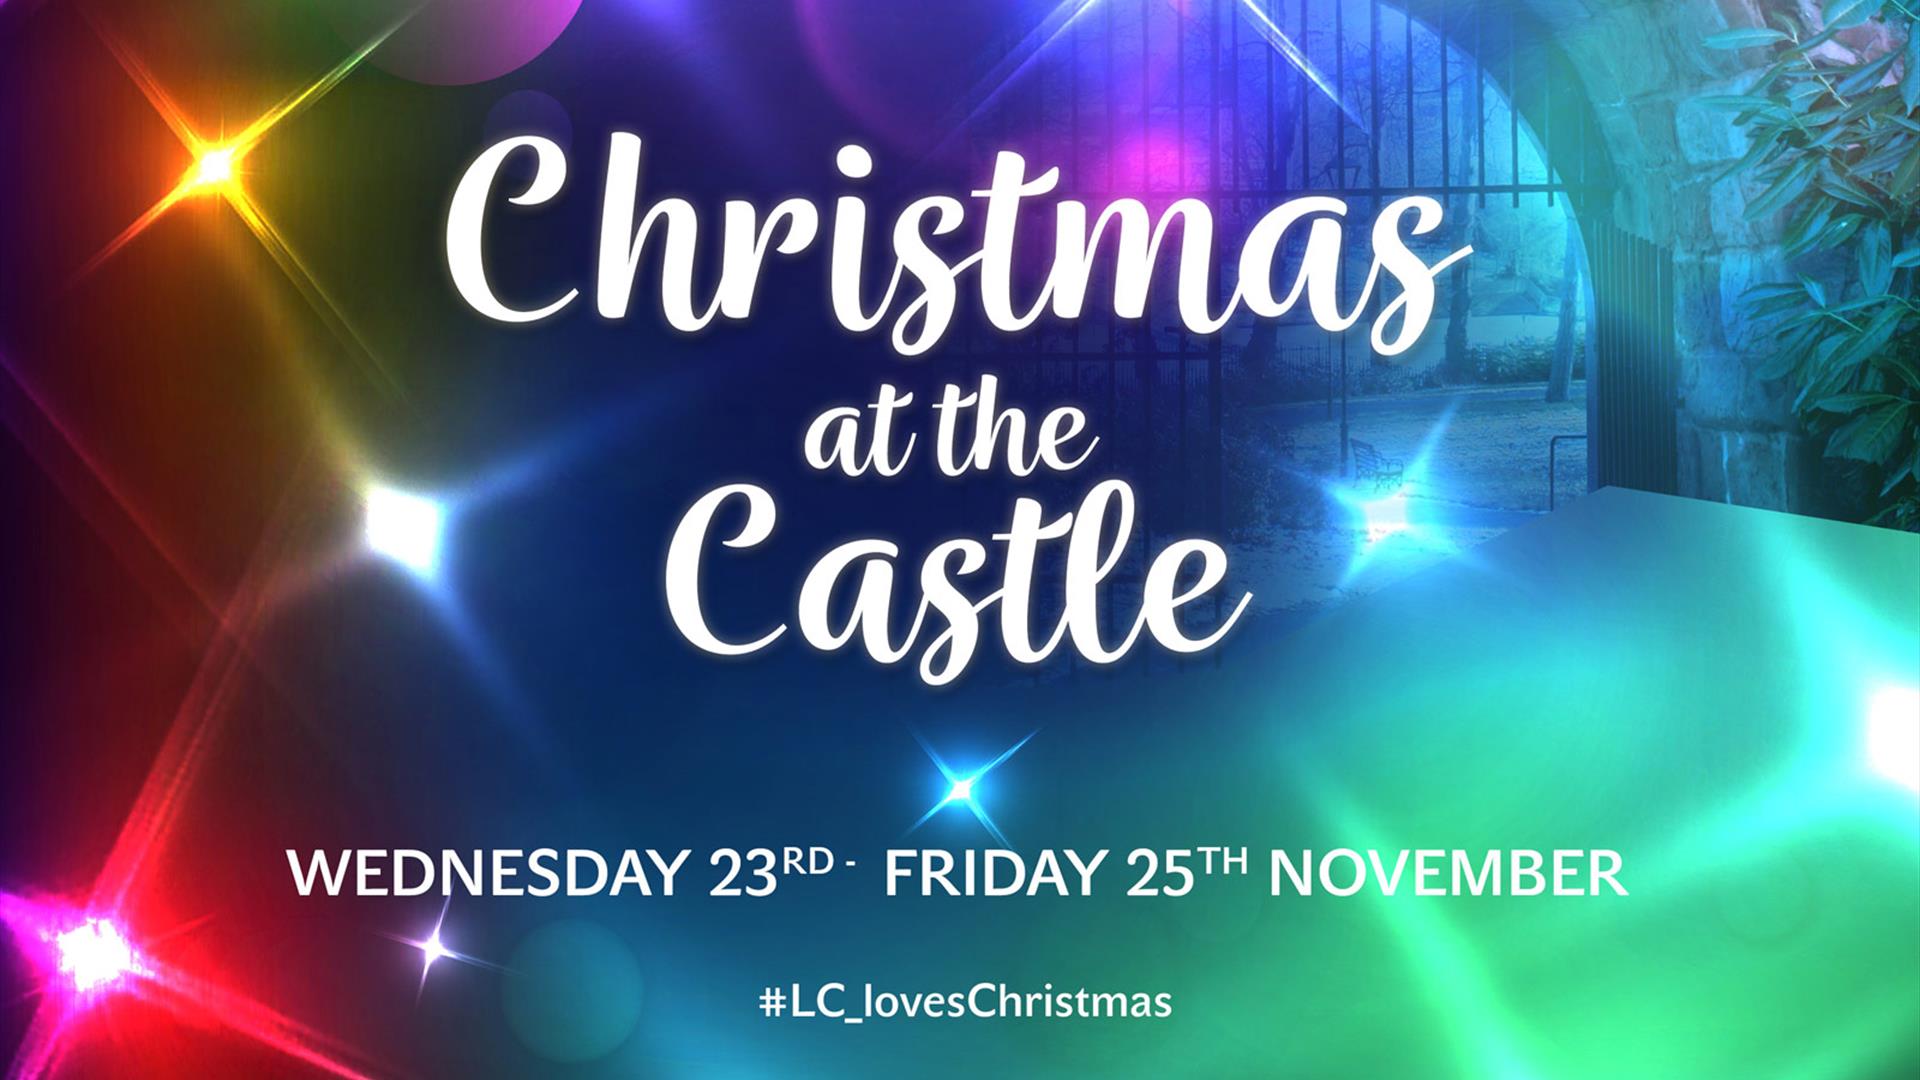 Colourful poster with Christmas Lights and shows an arch way to Castle Gardens, Lisburn